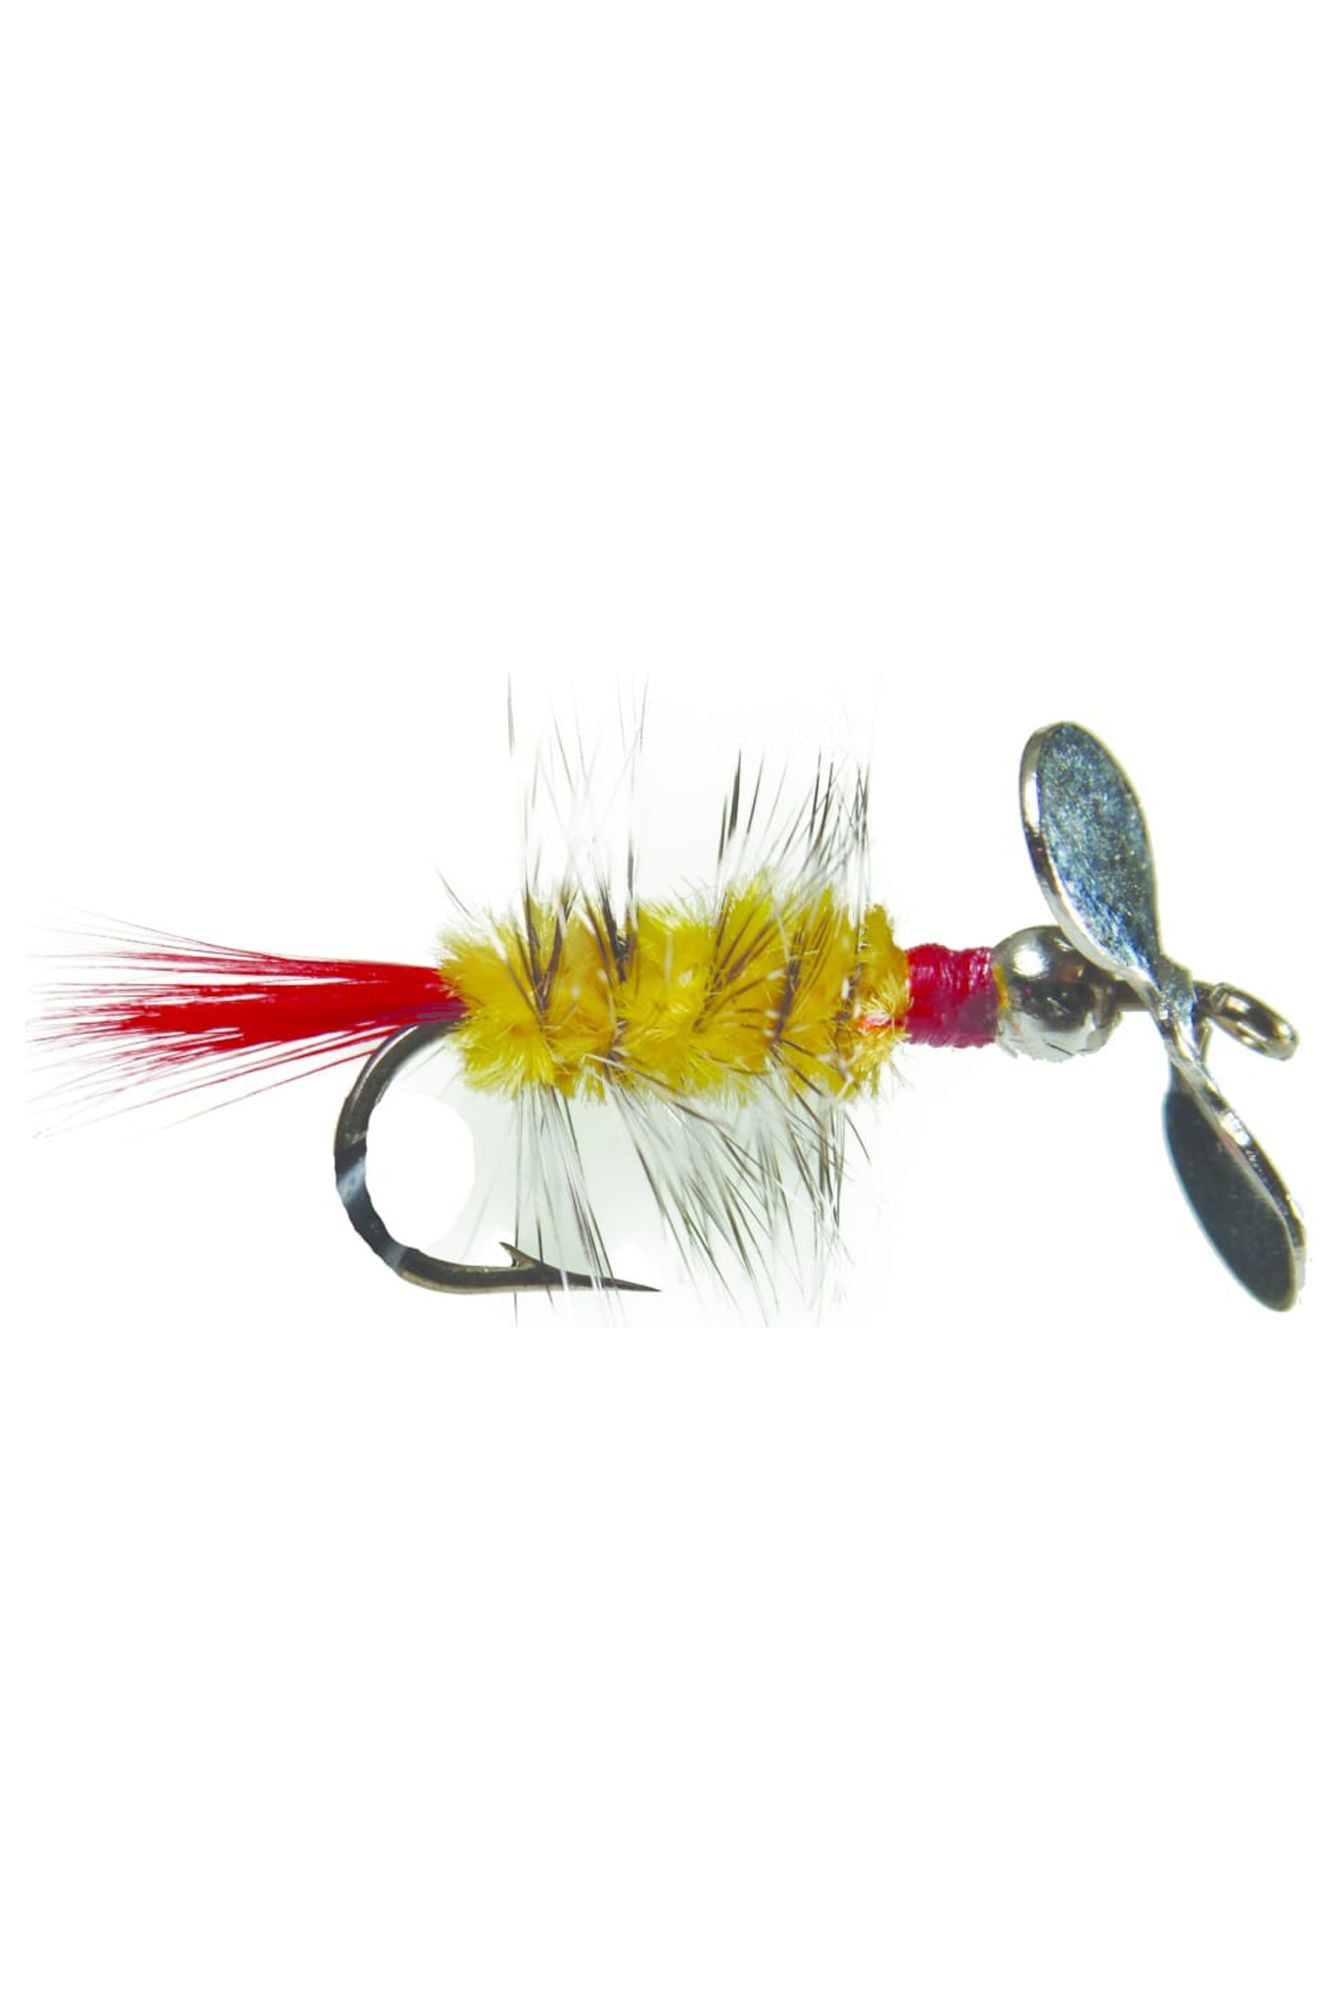 Pistol Pete's Freshwater Fly Fishing Lure for Trout & Panfish, Size 10,  Yellow, 2-pack 